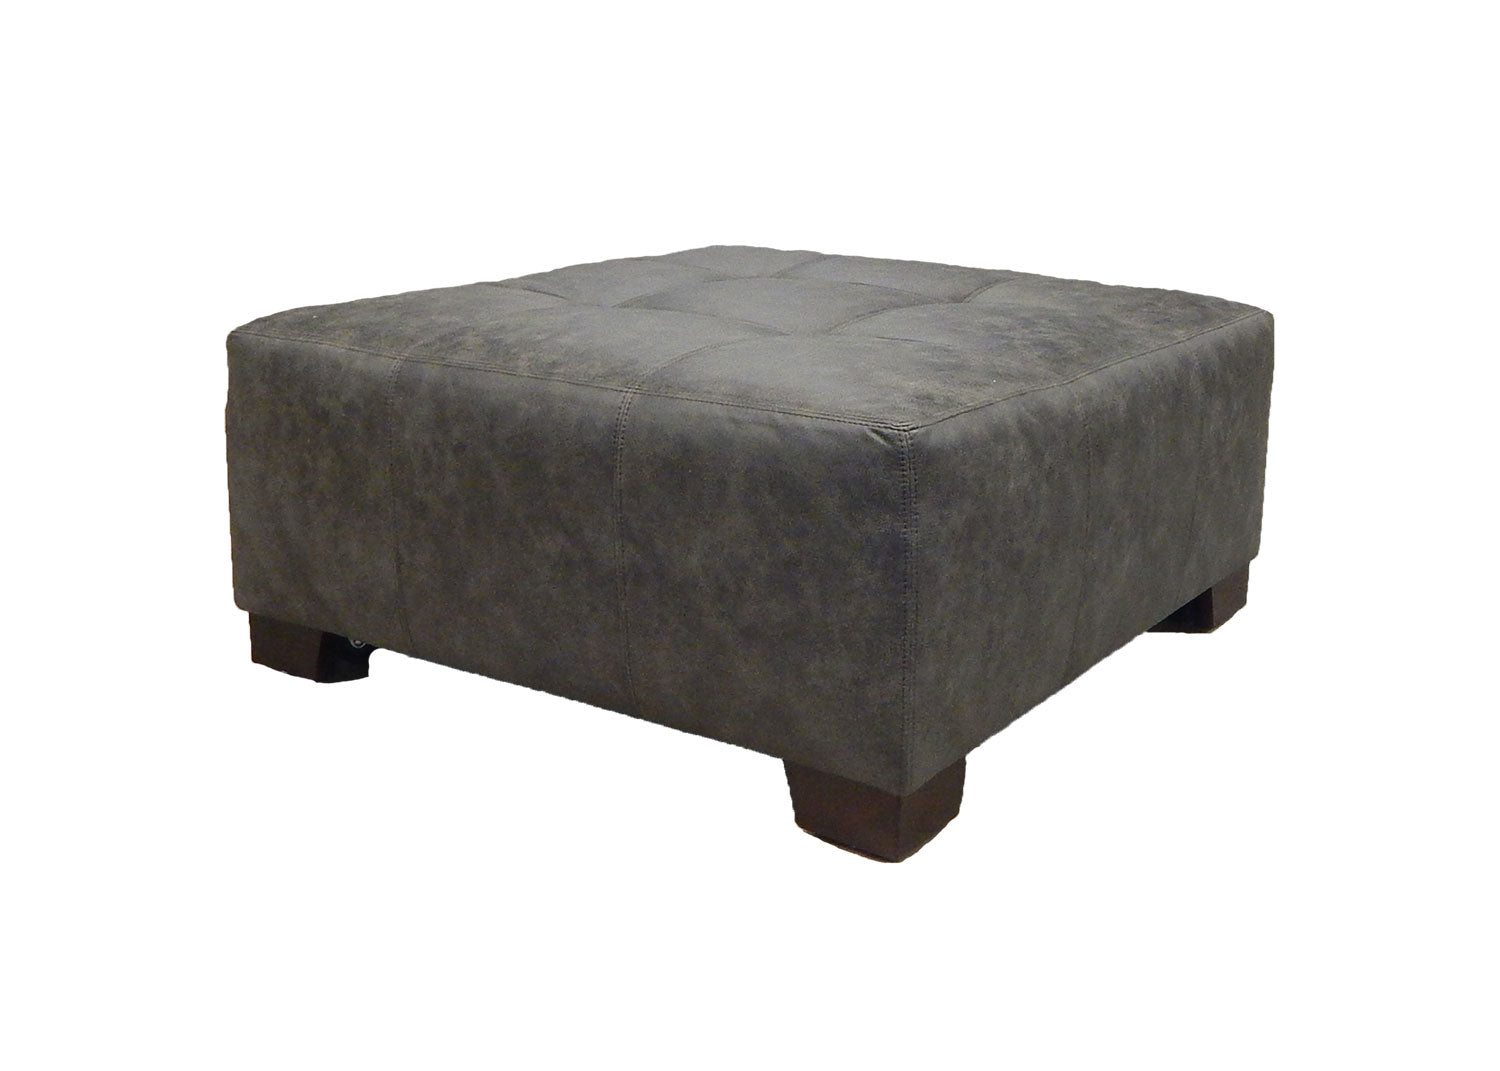 S351V4 Square Cocktail Ottoman- Brown and Beige